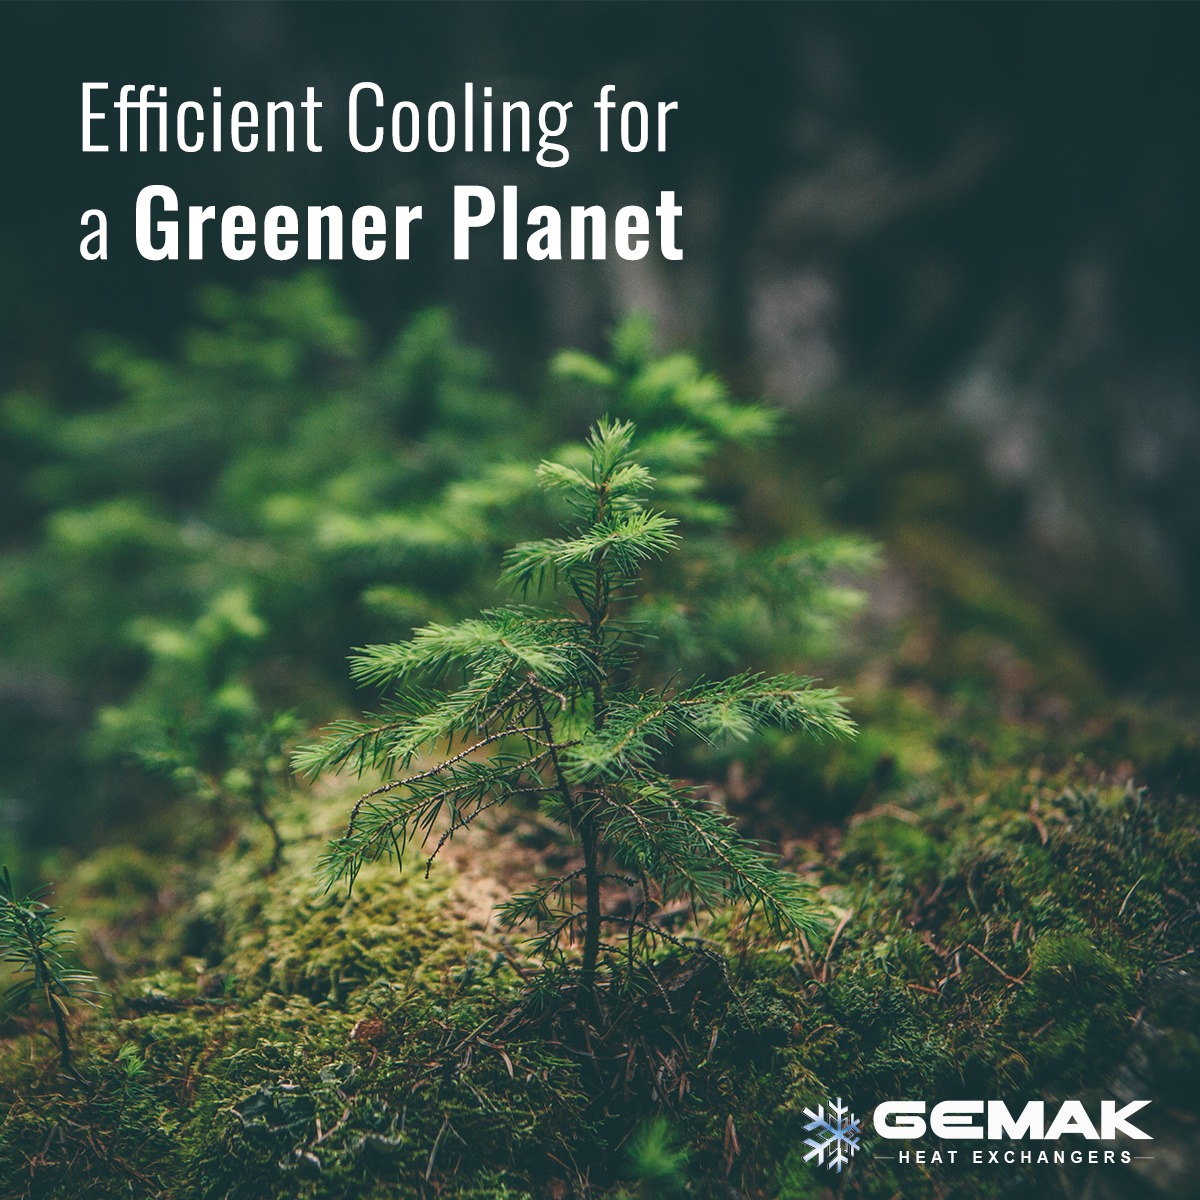 Our innovative cooling solutions not only ensure optimal performance but also prioritize sustainability, contributing to a greener and more eco-friendly tomorrow. Together, let's embrace efficient cooling to preserve our planet's precious resources. 🌿🏭

#EfficientCooling